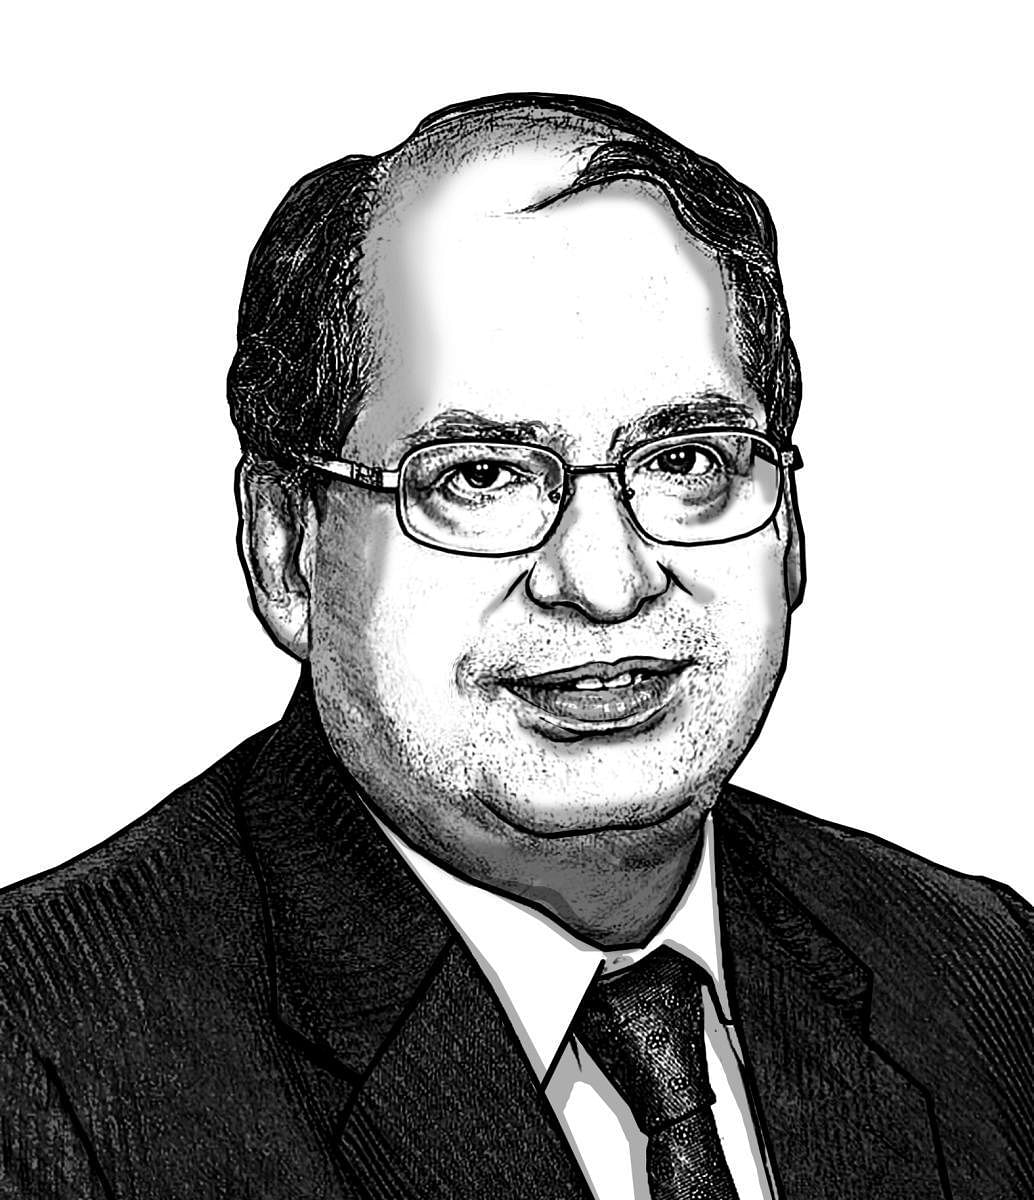 TCA RanganathanThe former chairman of the Export import Bank of India is a banker with a theory of everything@tcartca. Credit: DH illustration